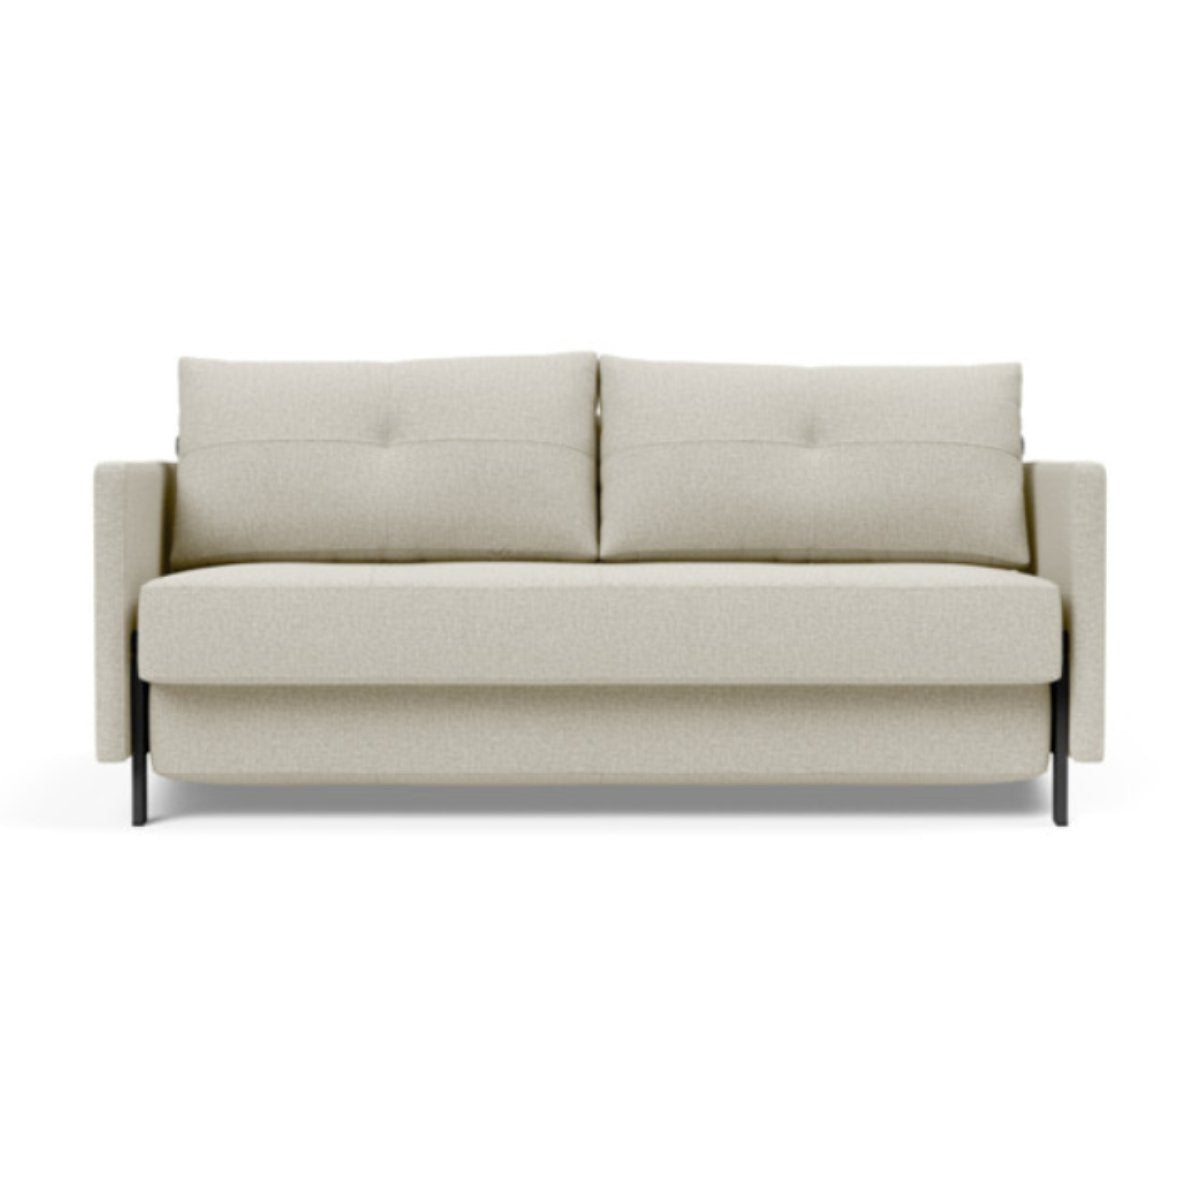 Load image into Gallery viewer, Cubed Queen Size Sofa Bed With Arms 527 Mixed Dance NaturalSofa Beds INNOVATION  527 Mixed Dance Natural   Four Hands, Burke Decor, Mid Century Modern Furniture, Old Bones Furniture Company, Old Bones Co, Modern Mid Century, Designer Furniture, https://www.oldbonesco.com/
